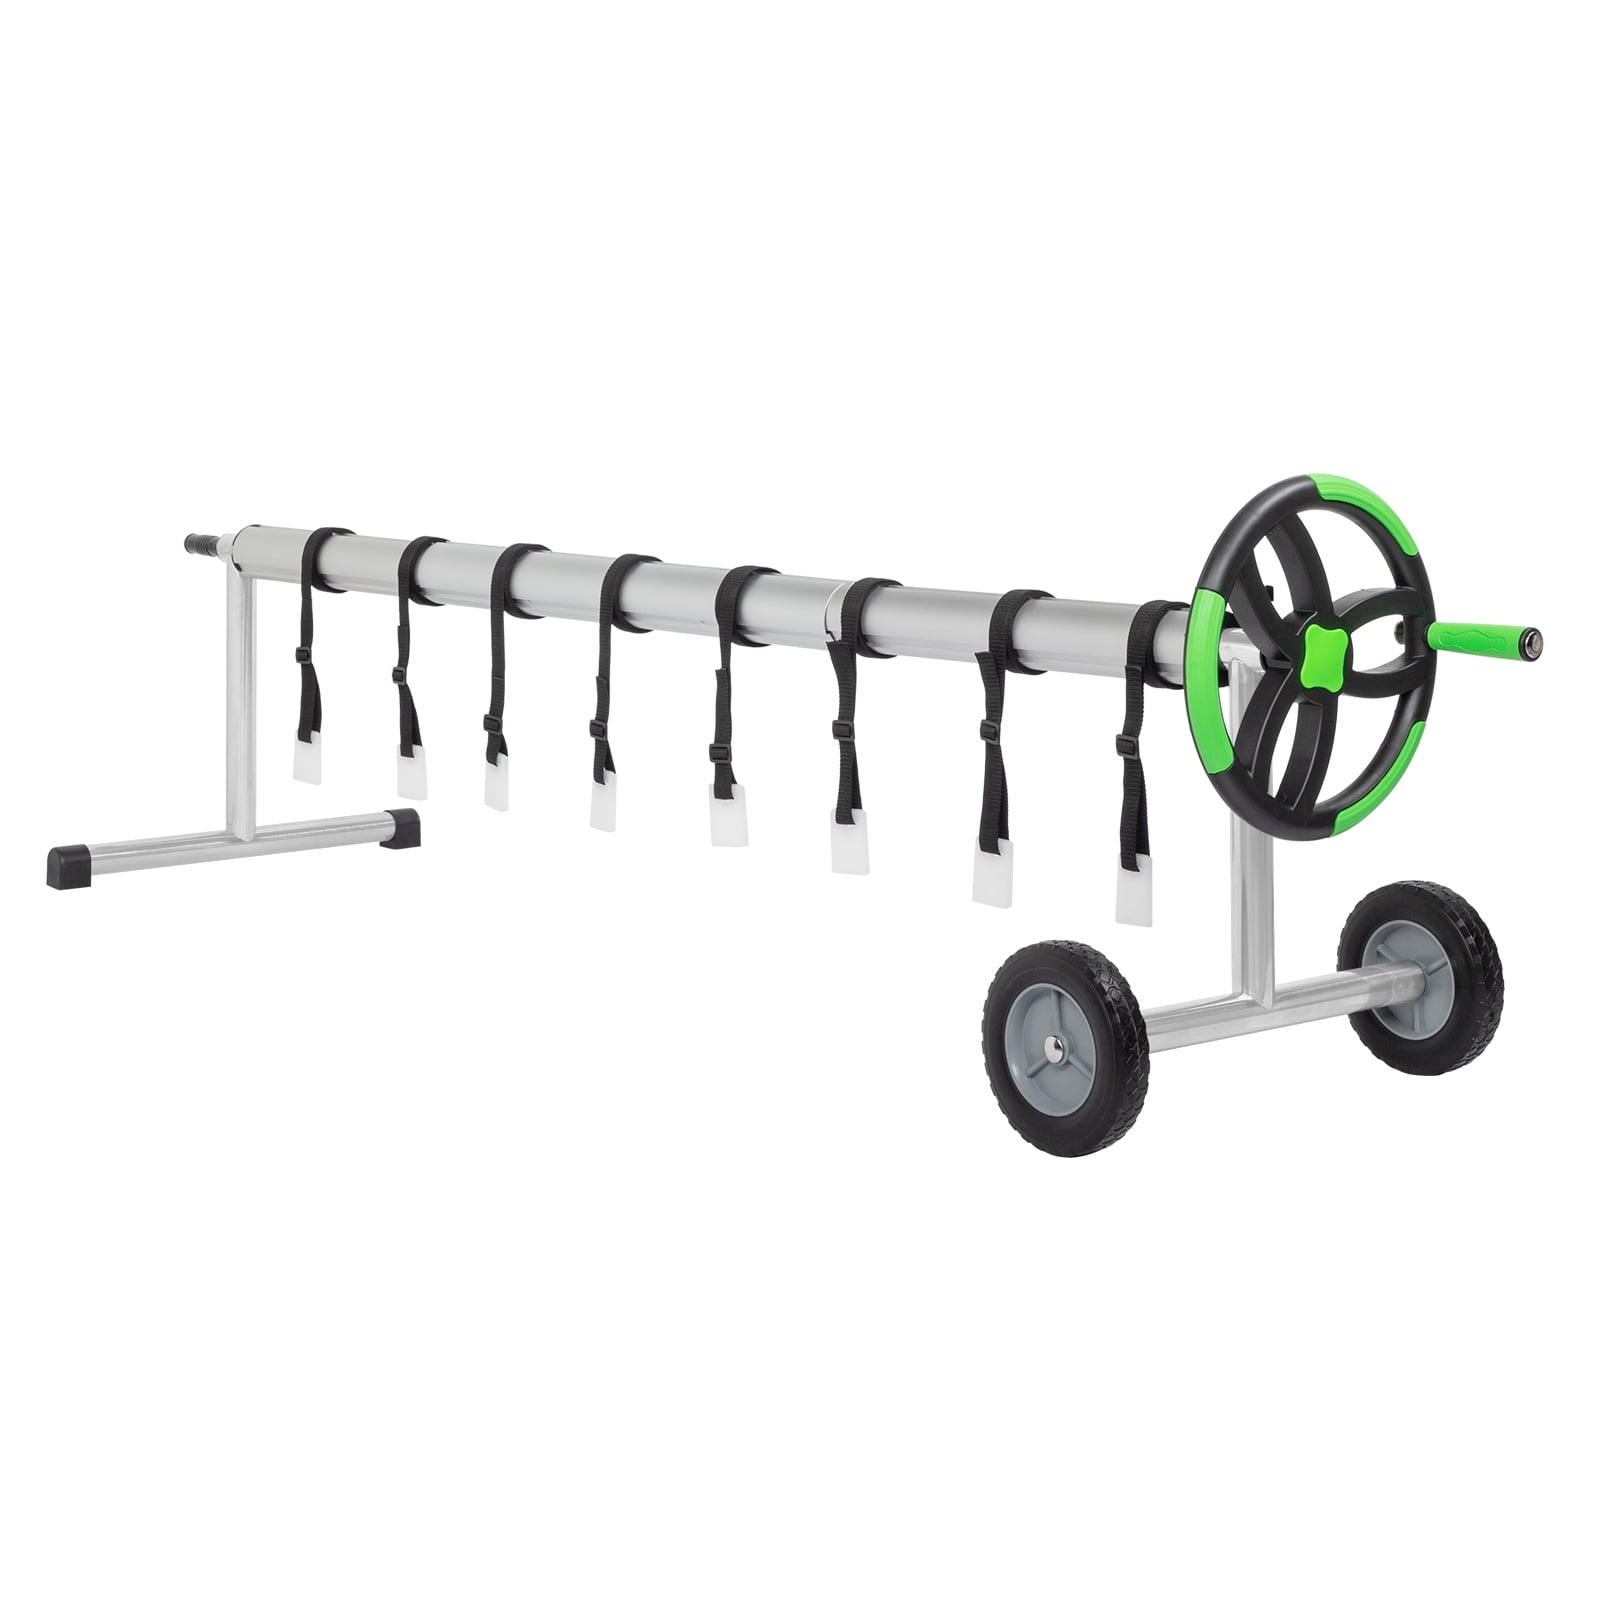 The Storm Commercial Inground Solar Reel - Up to 20' Wide 